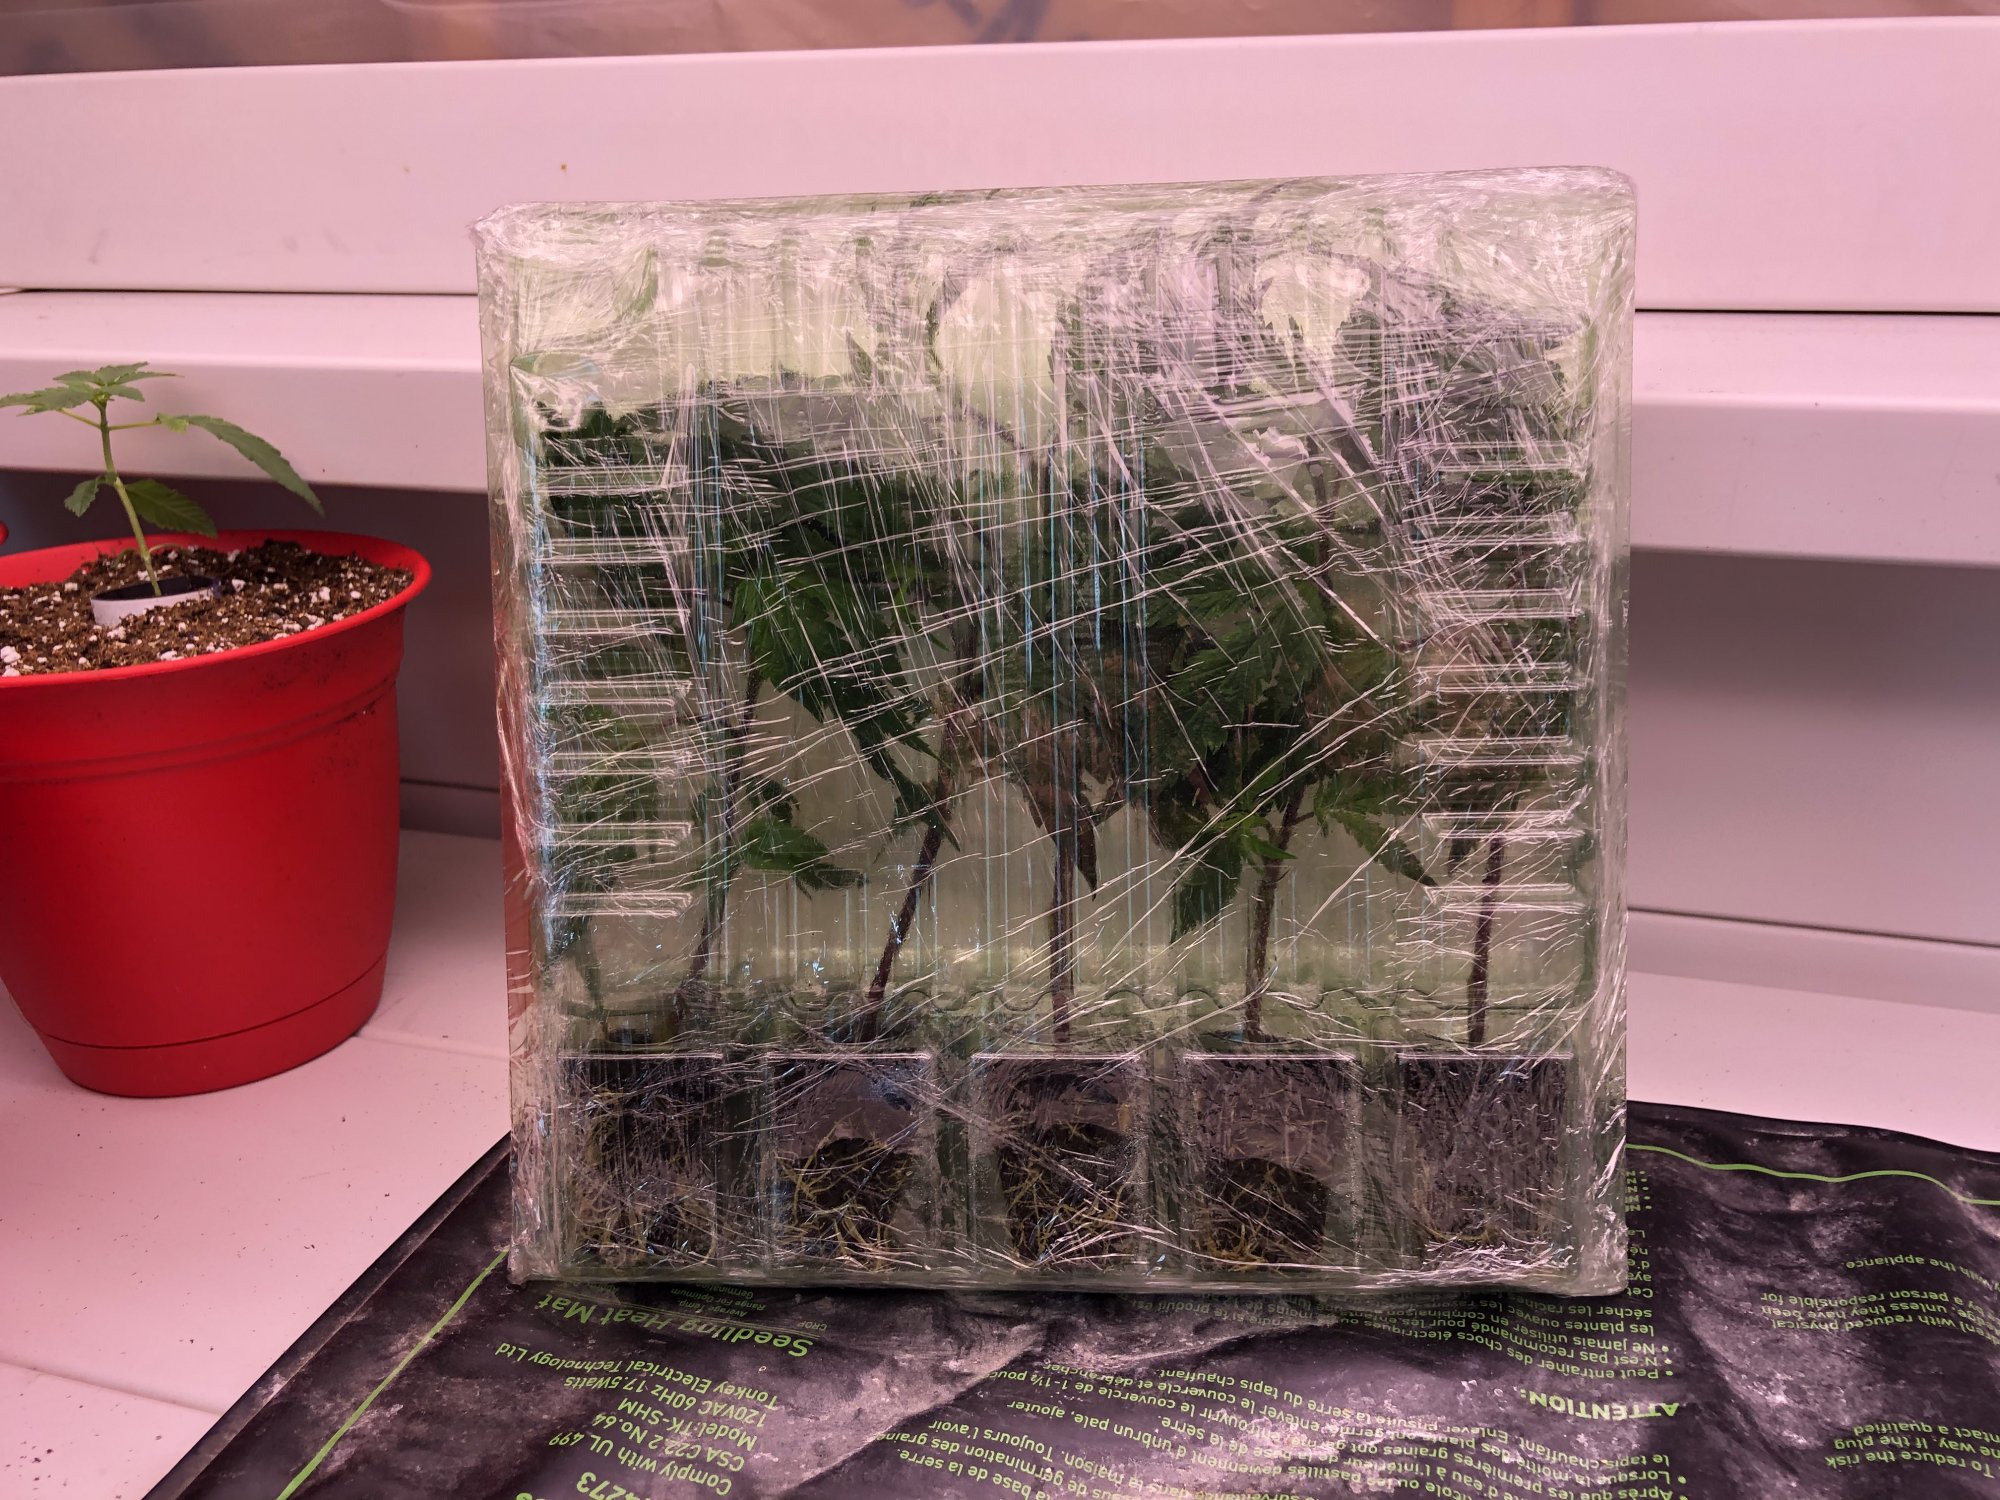 Just received my clones from dookiefarms 2